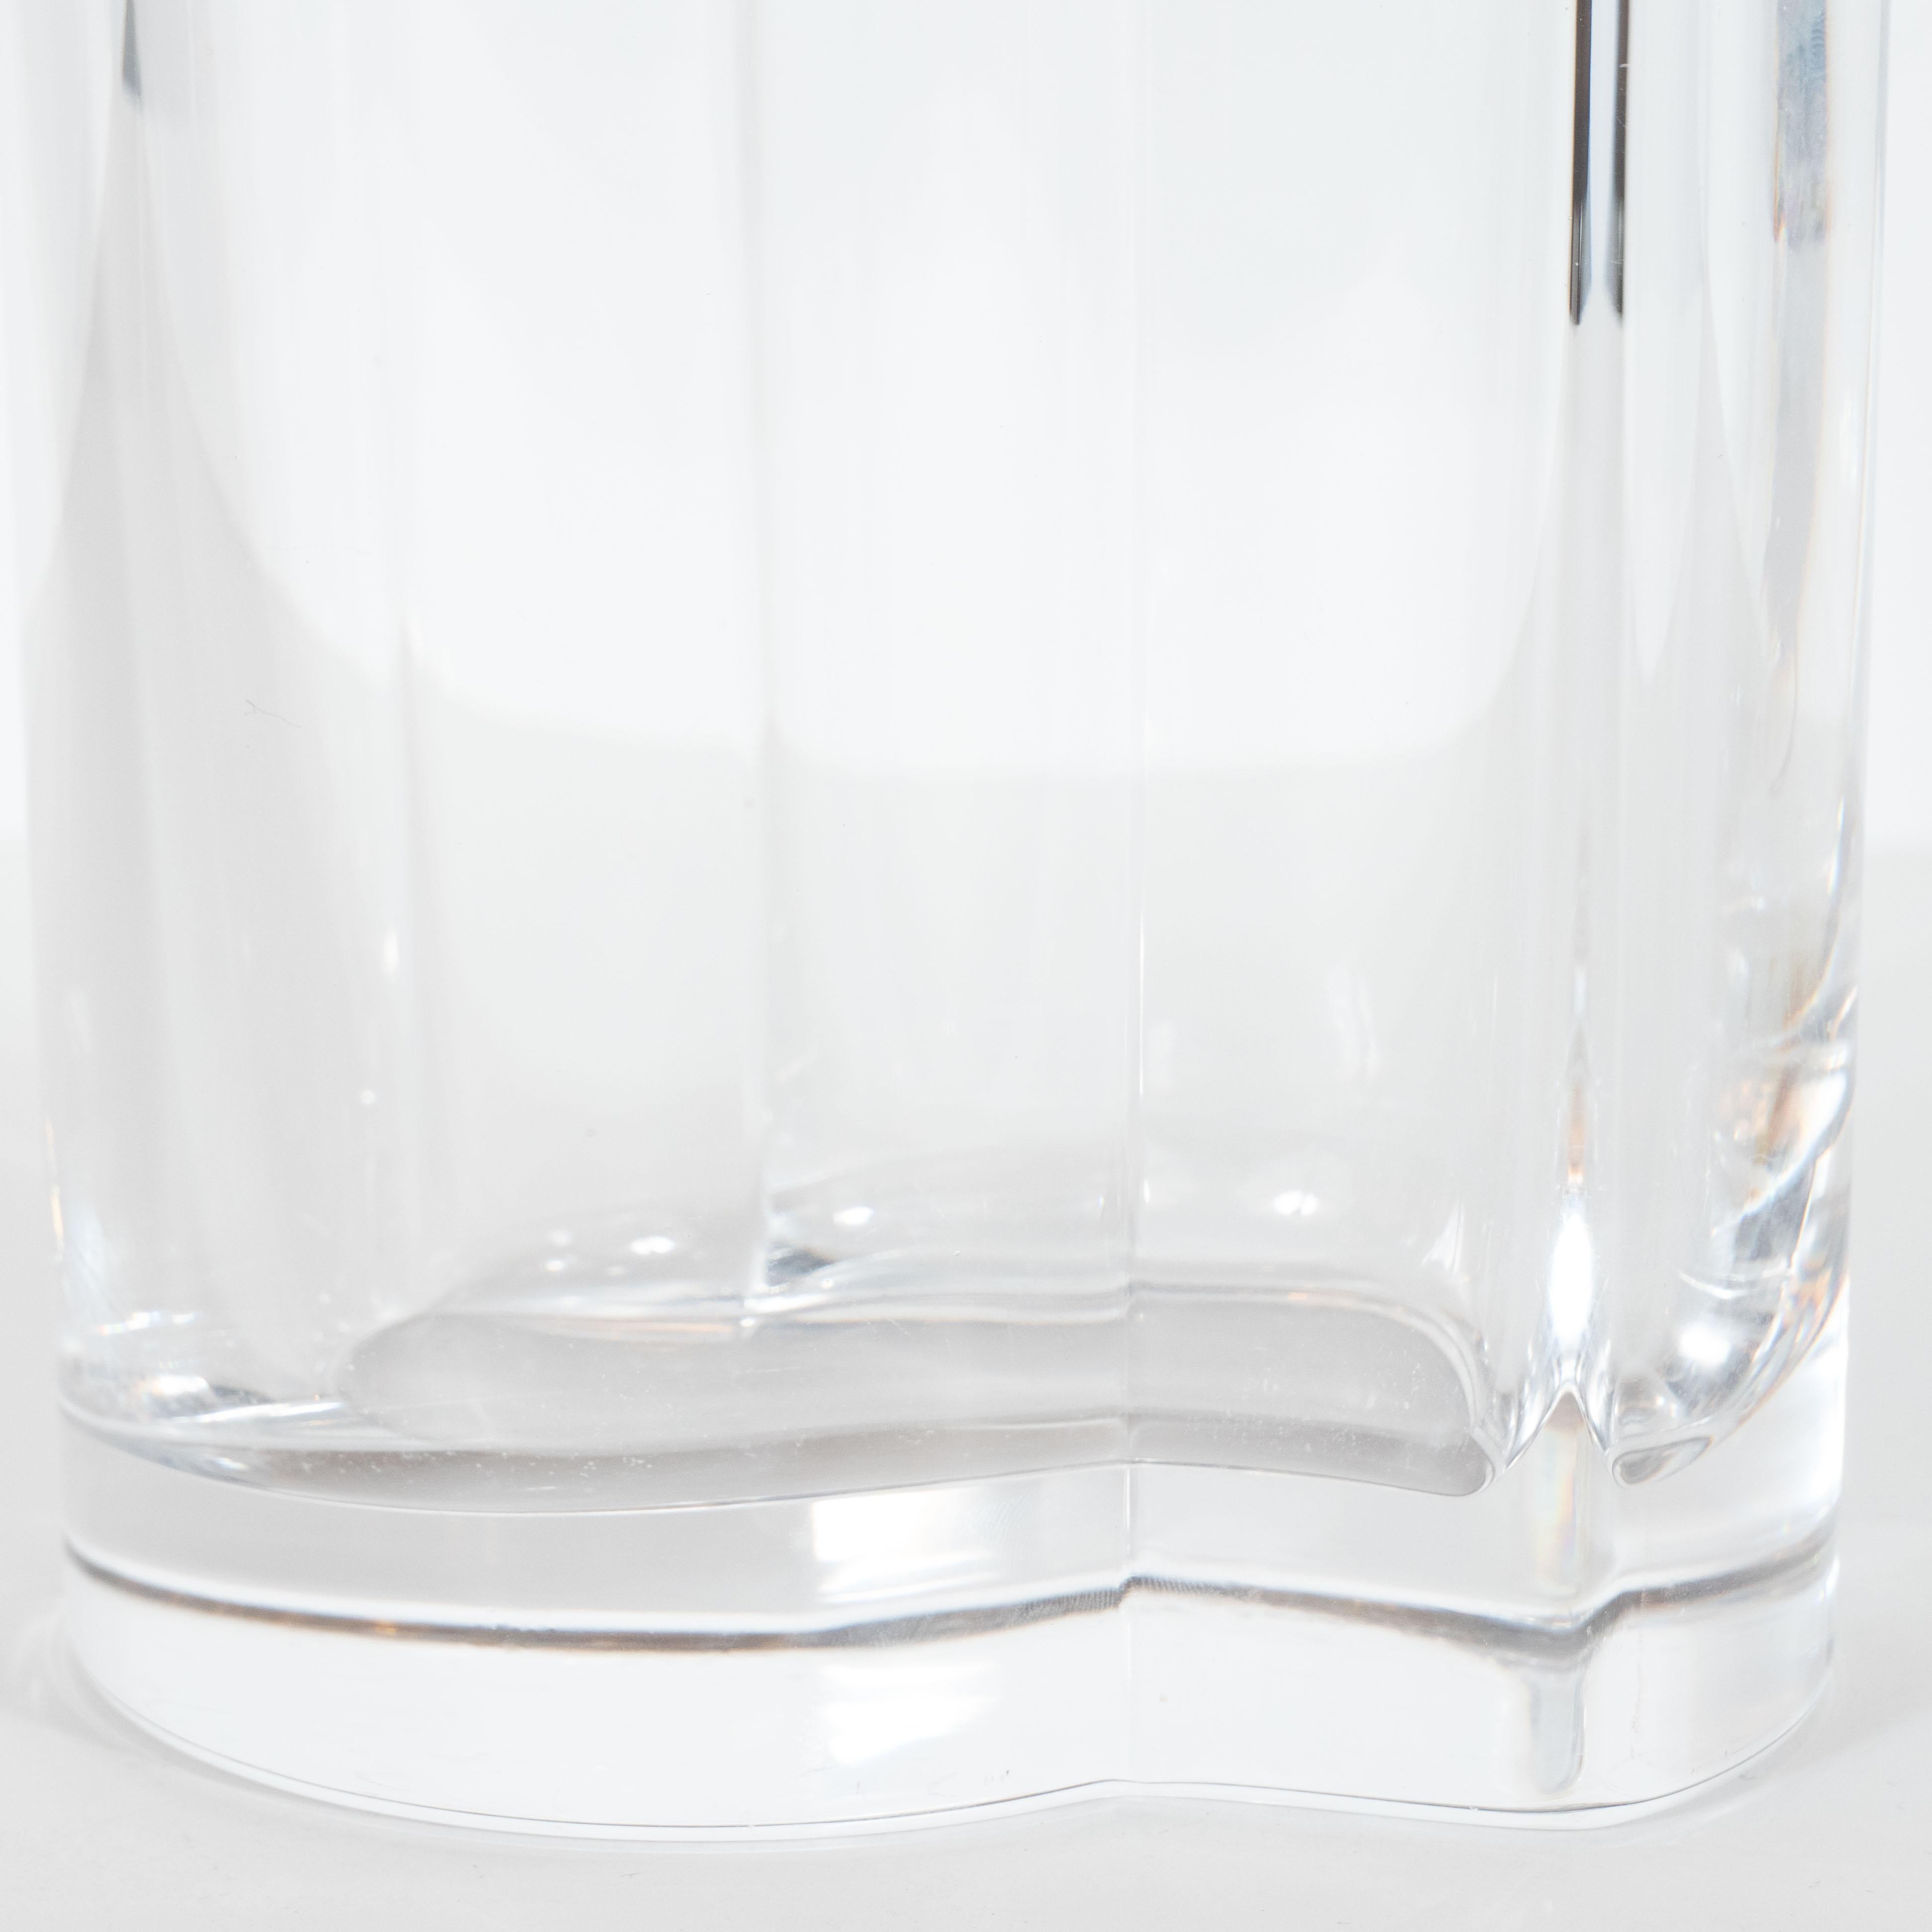 Scandinavian Mid-Century Modern Translucent Glass Vase by Orrefors In Excellent Condition For Sale In New York, NY